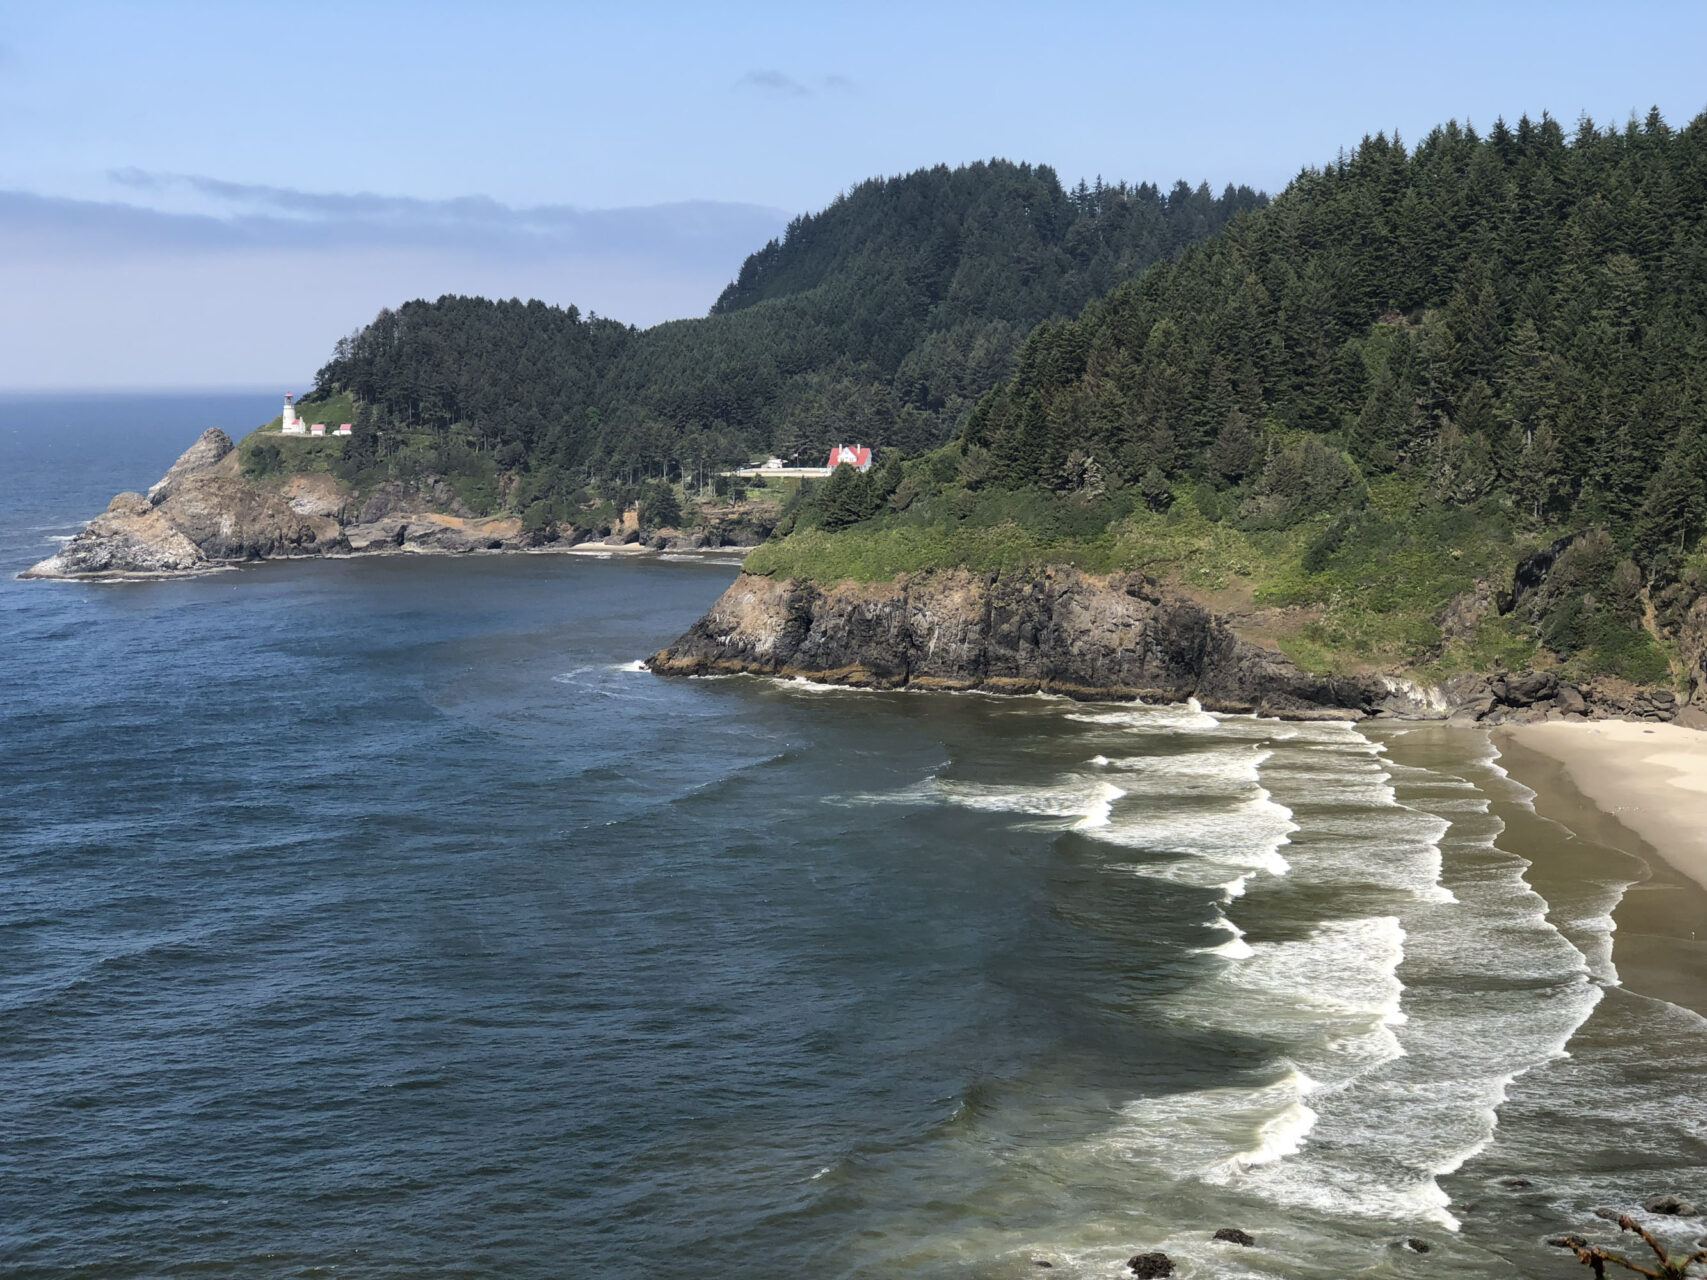 Views such as Heceta Head Lighthouse is what makes the PCH highway such a must-do drive.